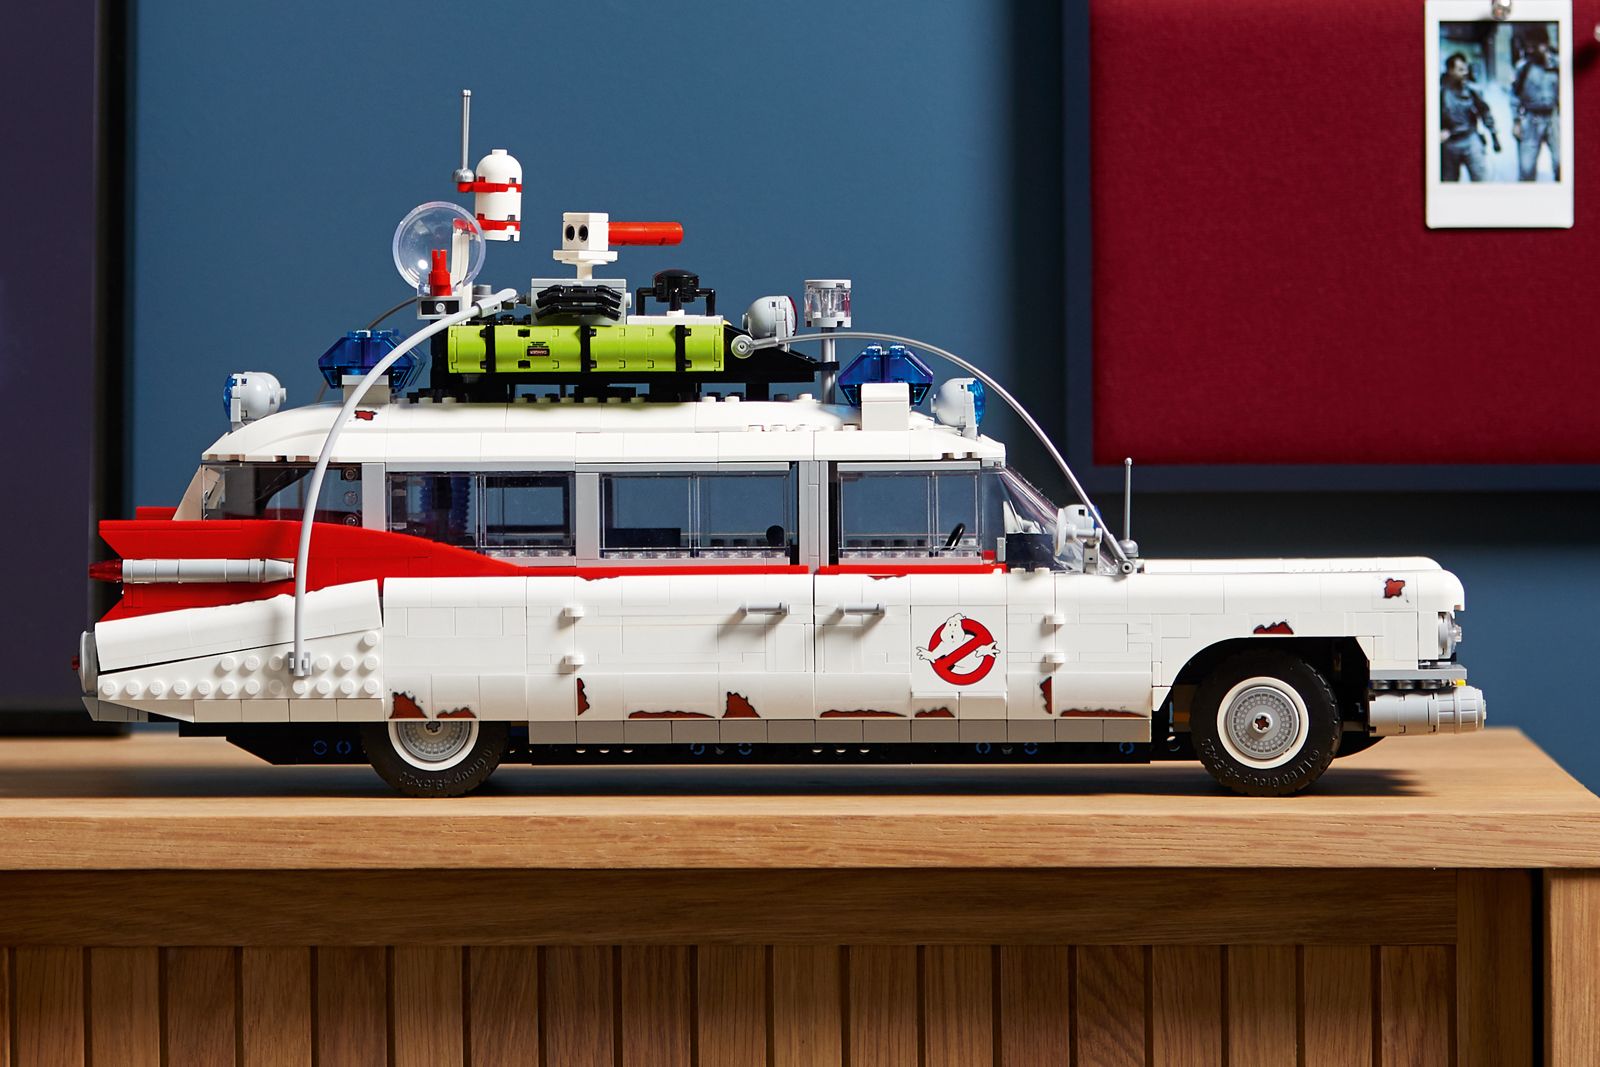 Lego's latest version of Ghostbusters' Ecto-1 is the most detailed yet photo 1